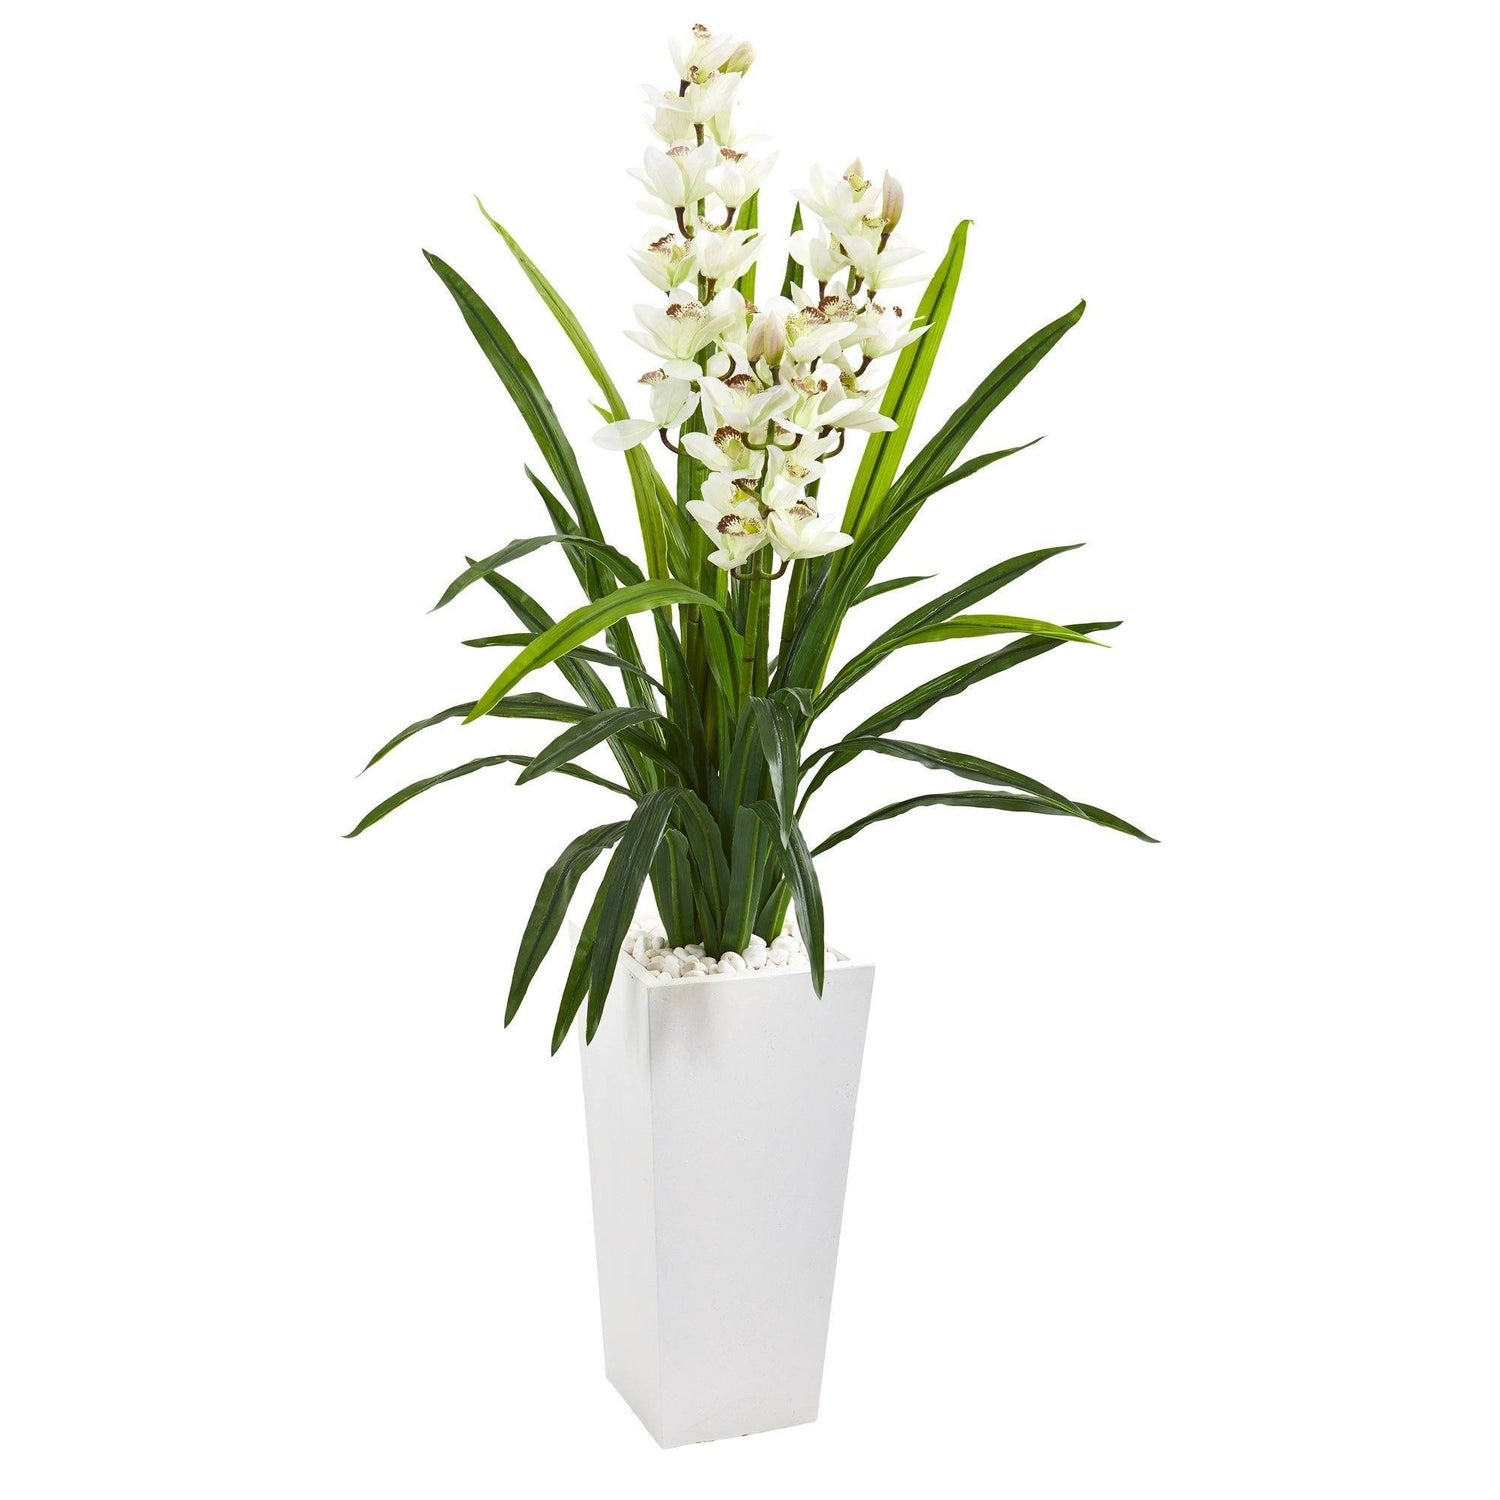 4.5’ Cymbidium Orchid Artificial Plant in White Tower Planter